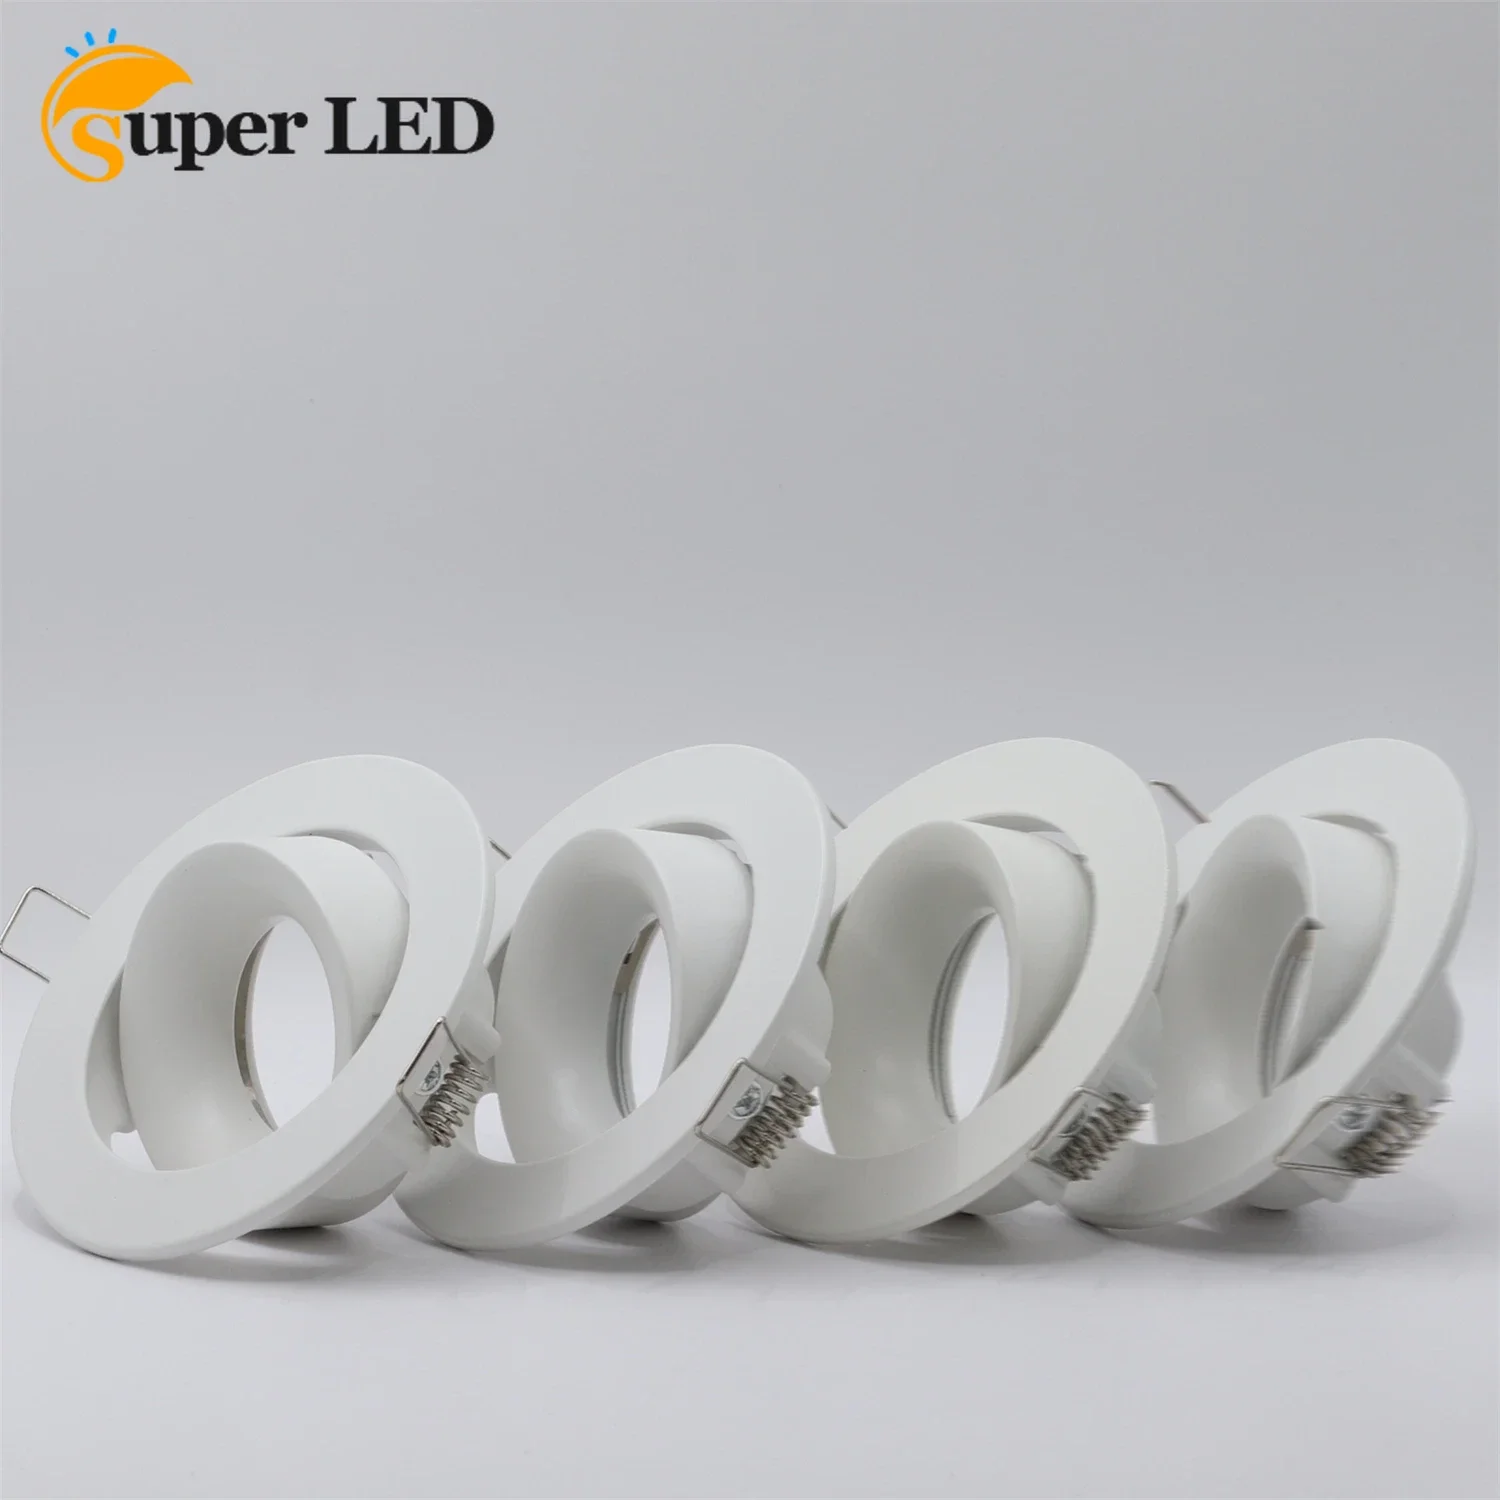 

Zinc Alloy Mounting Frame GU10 White Round Cut Out 85mm-90mm Retro Fit Lamp Frame Spotlight